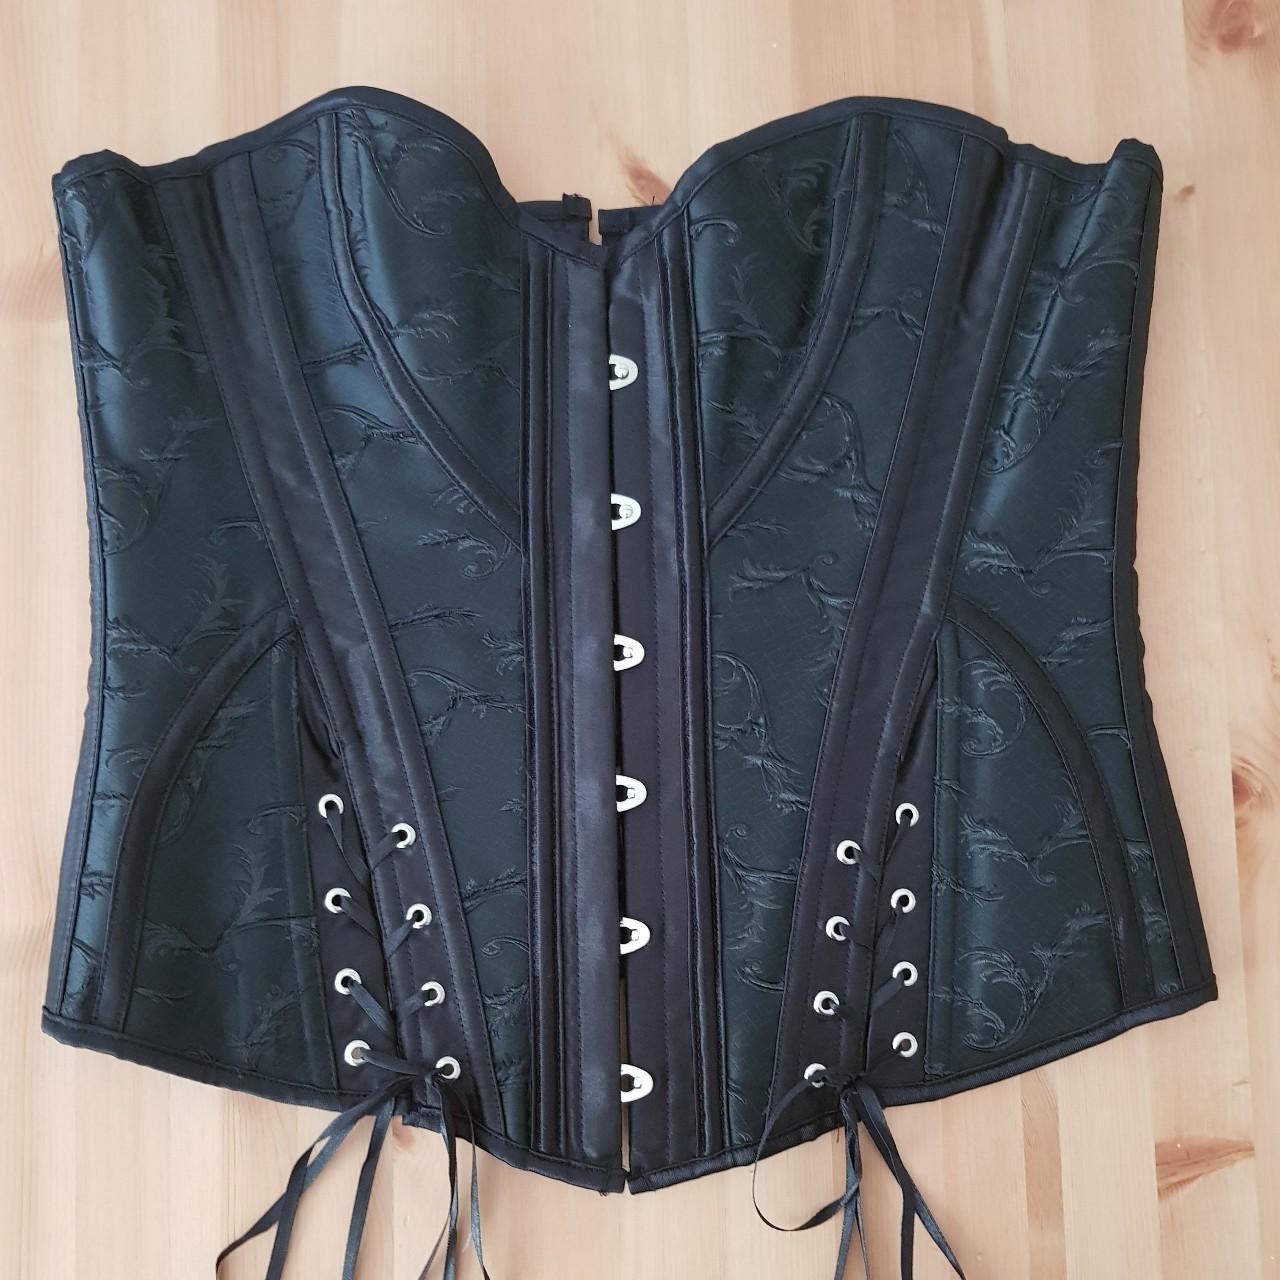 VAACODOR CORSET no sizing on it but laid flat the - Depop